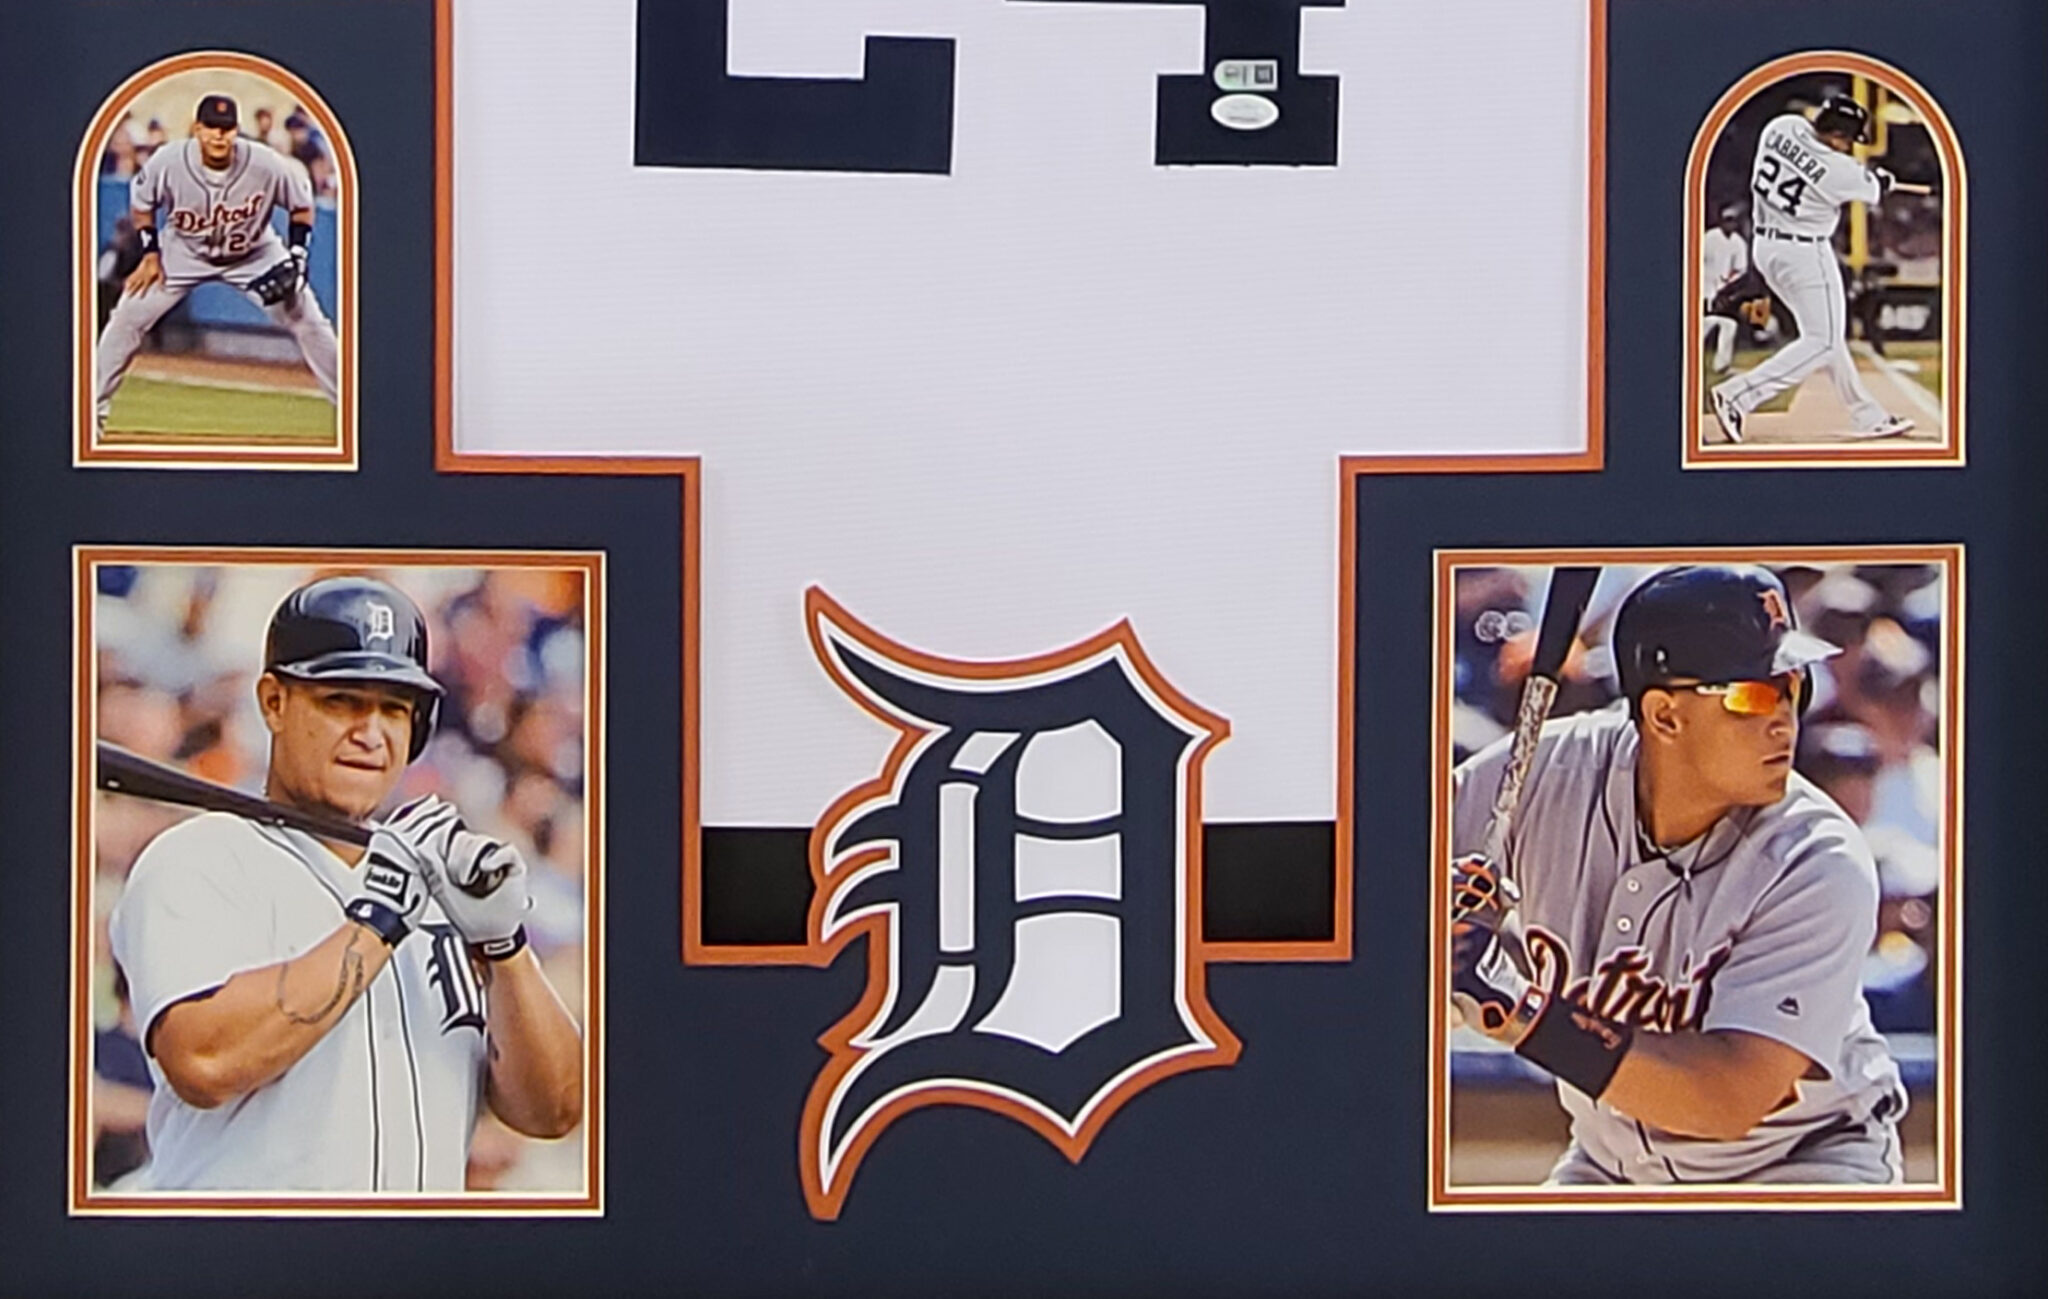 Miguel Cabrera Autographed Framed Tigers White Jersey - The Stadium Studio